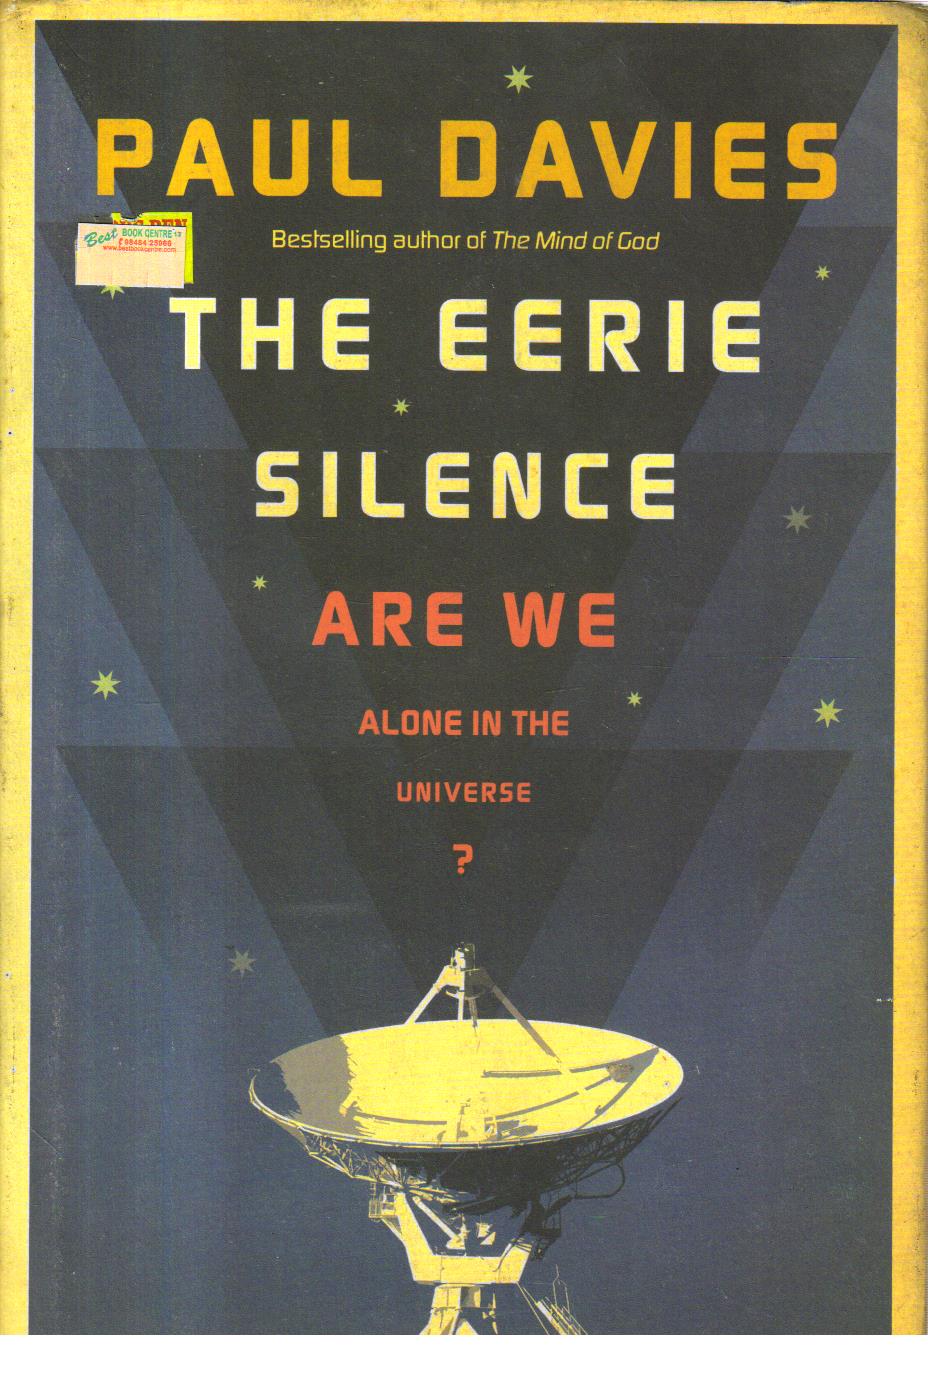 The Eerie Silence are we alone in the Universe.